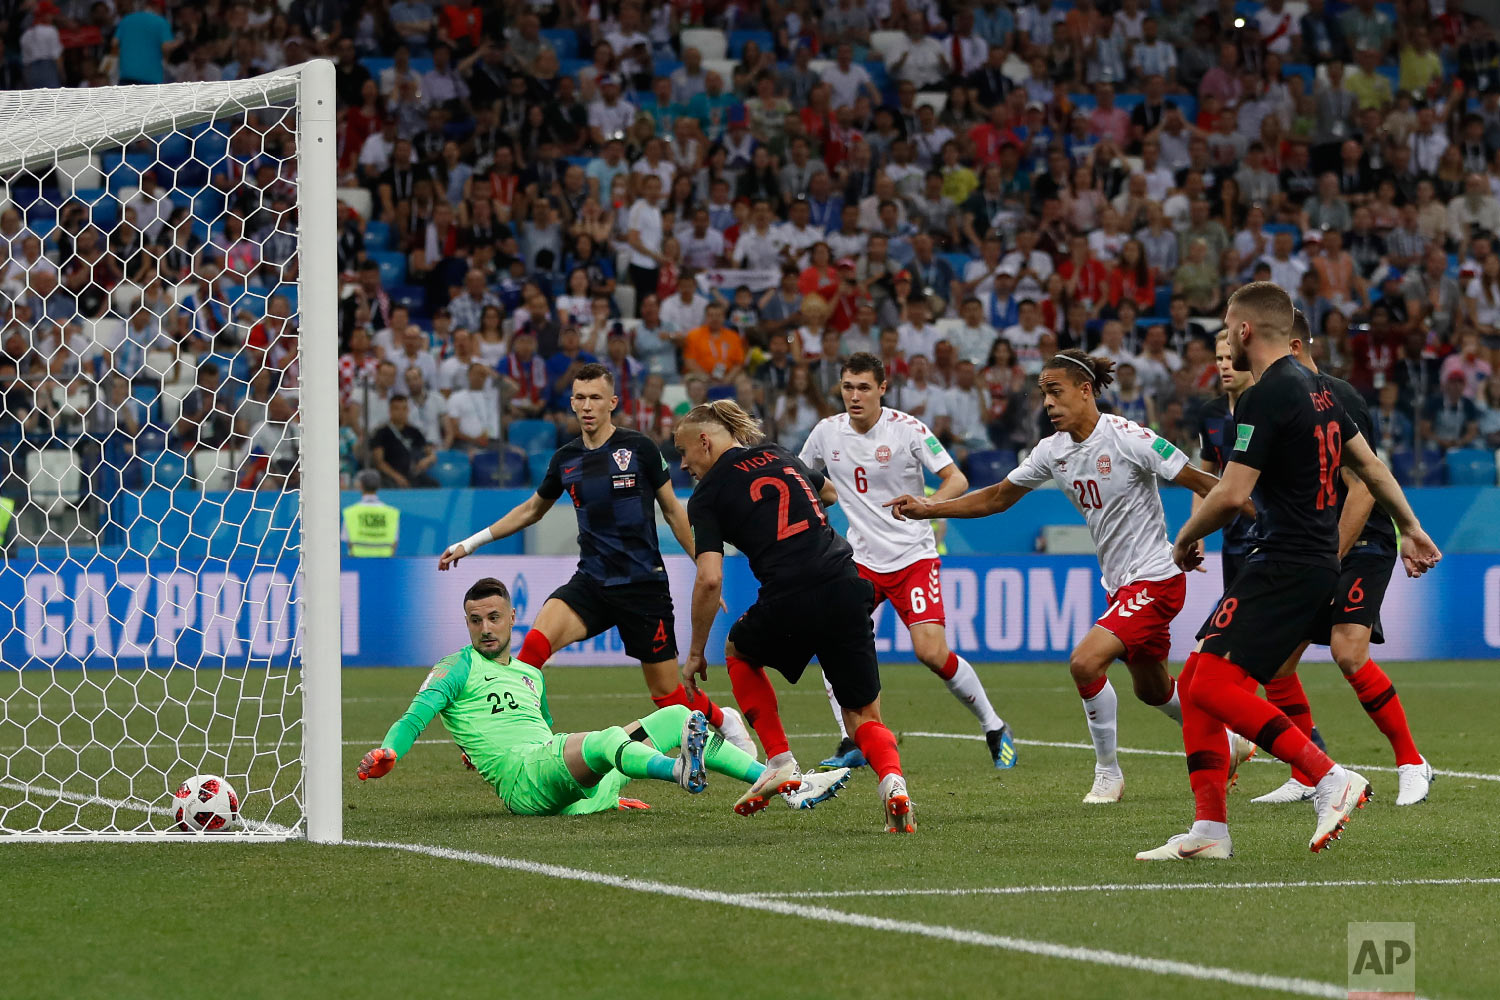  Croatia goalkeeper Danijel Subasic, left on the pitch, looks at the ball after Denmark's Mathias Jorgensen scored the opening goal during the round of 16 match between Croatia and Denmark at the 2018 soccer World Cup in the Nizhny Novgorod Stadium, 